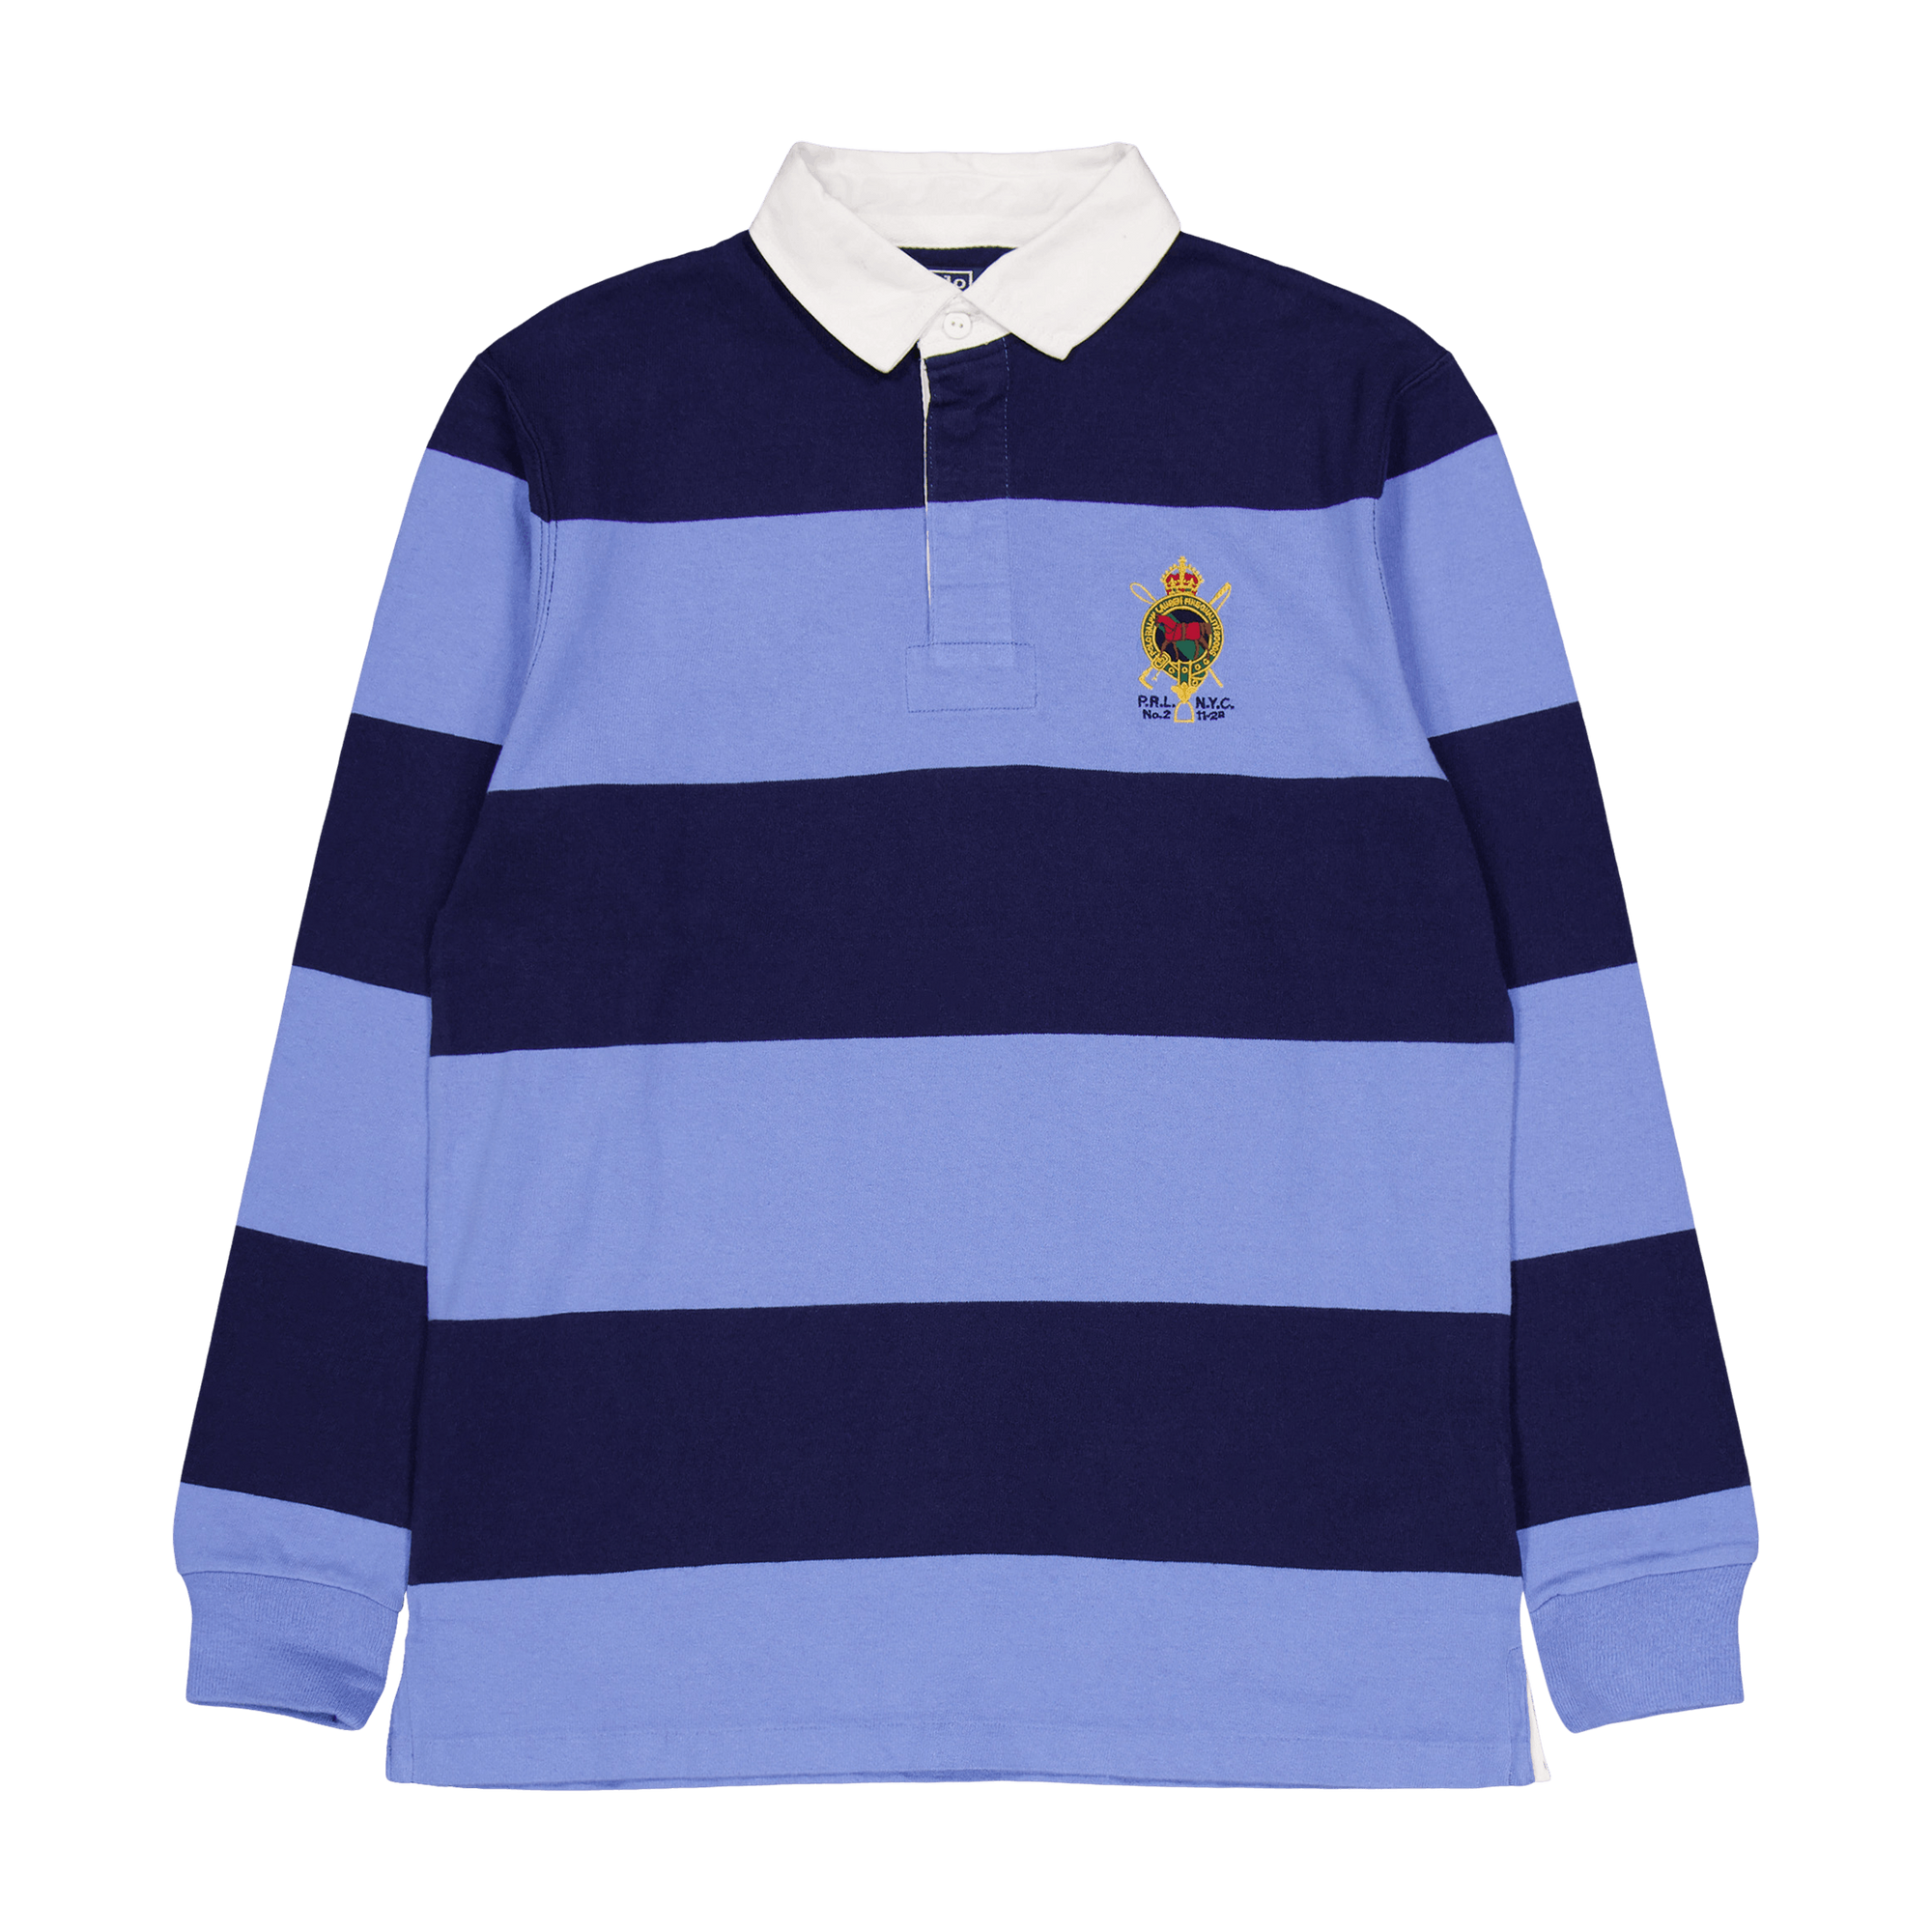 Classic Fit Striped Jersey Rugby Shirt Newport Navy Multi